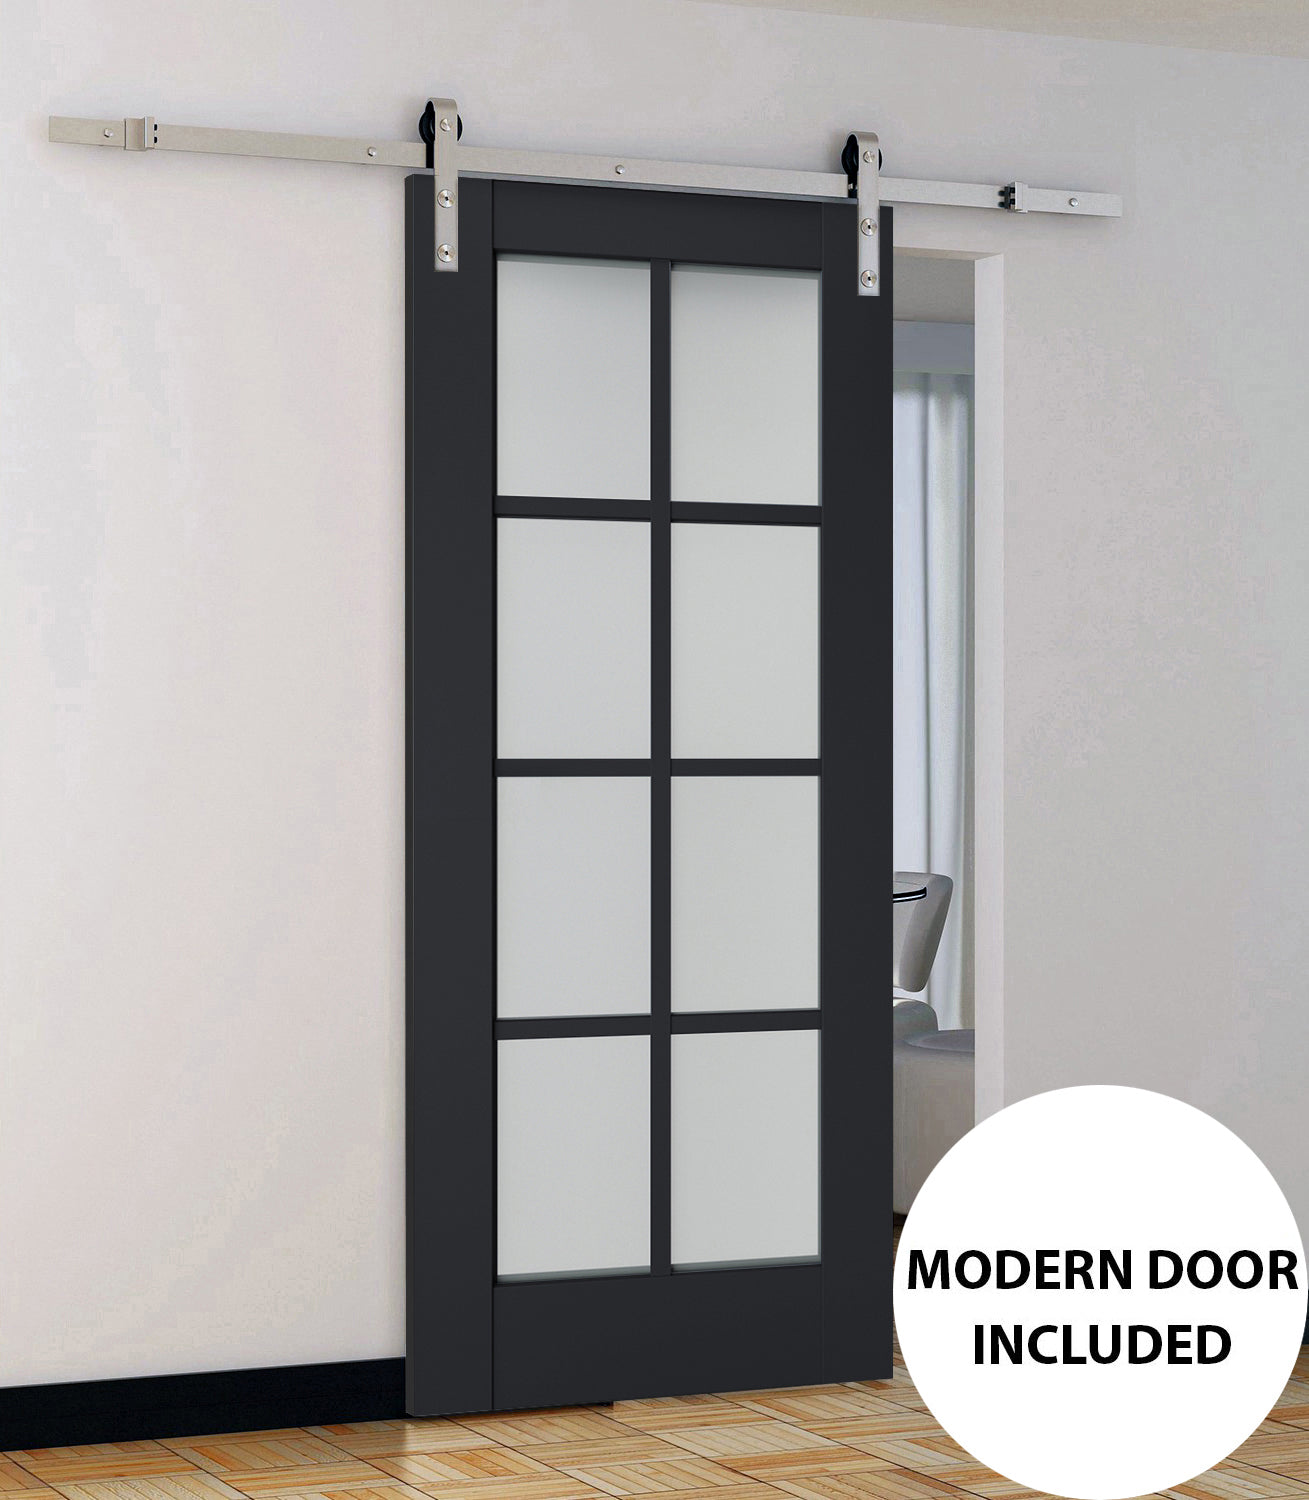 Veregio 7412 Antracite Barn Door with Frosted Glass and Silver Finish Rail